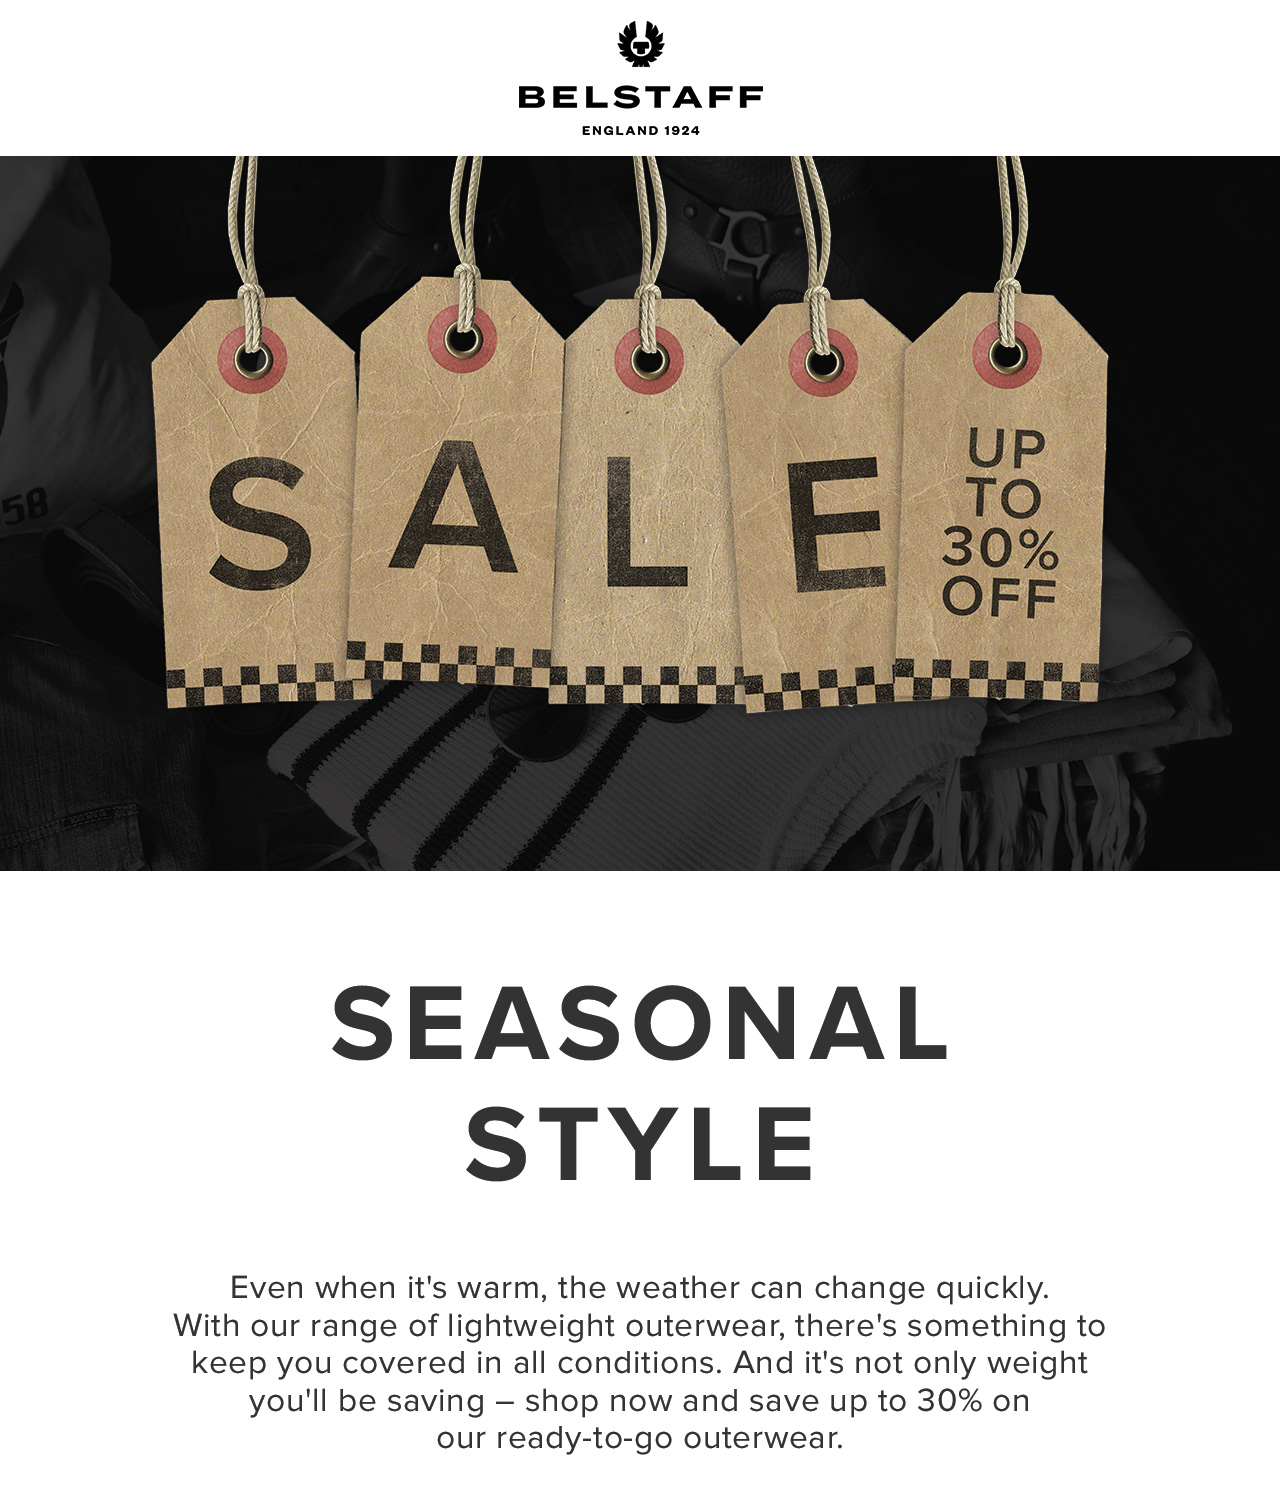 Receive up to 30% off seasonal styles, including outerwear, clothing and accessories. 